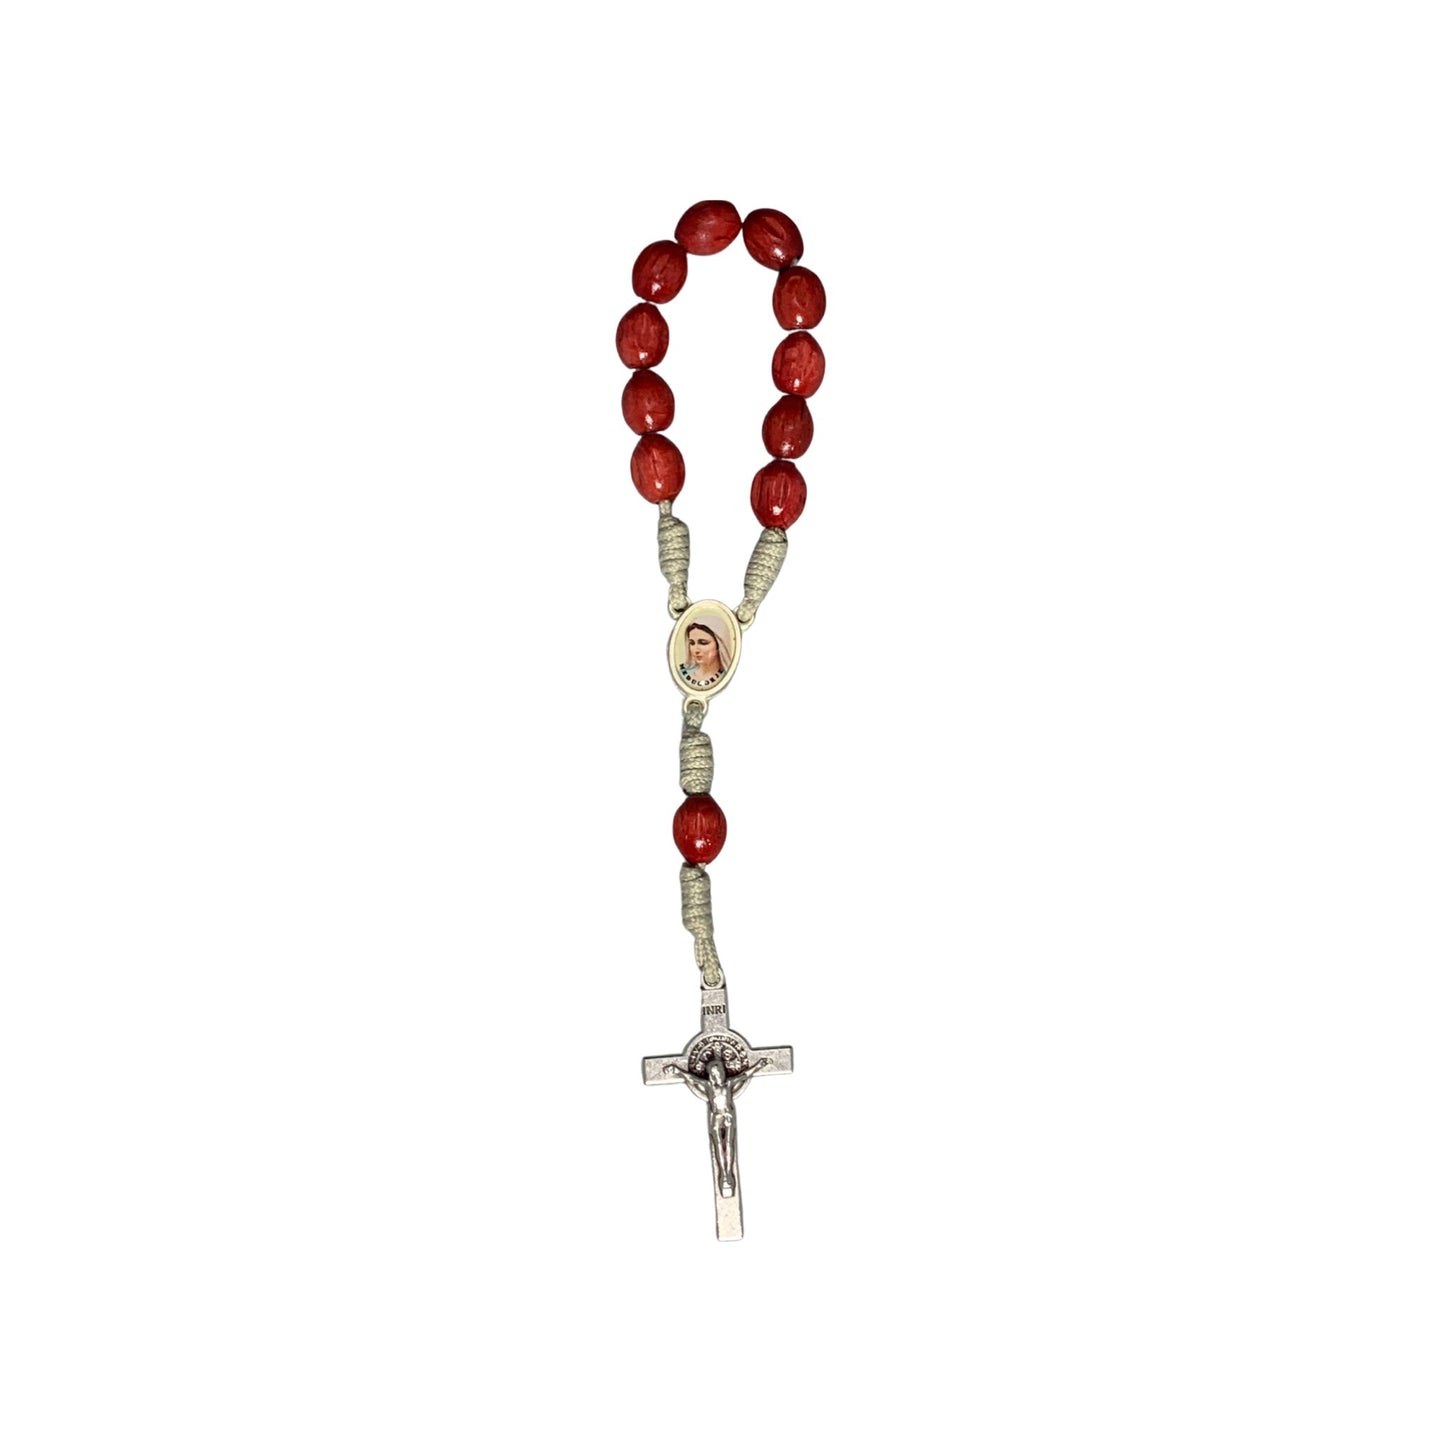 Queen of Peace Decade Rosary of Assorted Colors